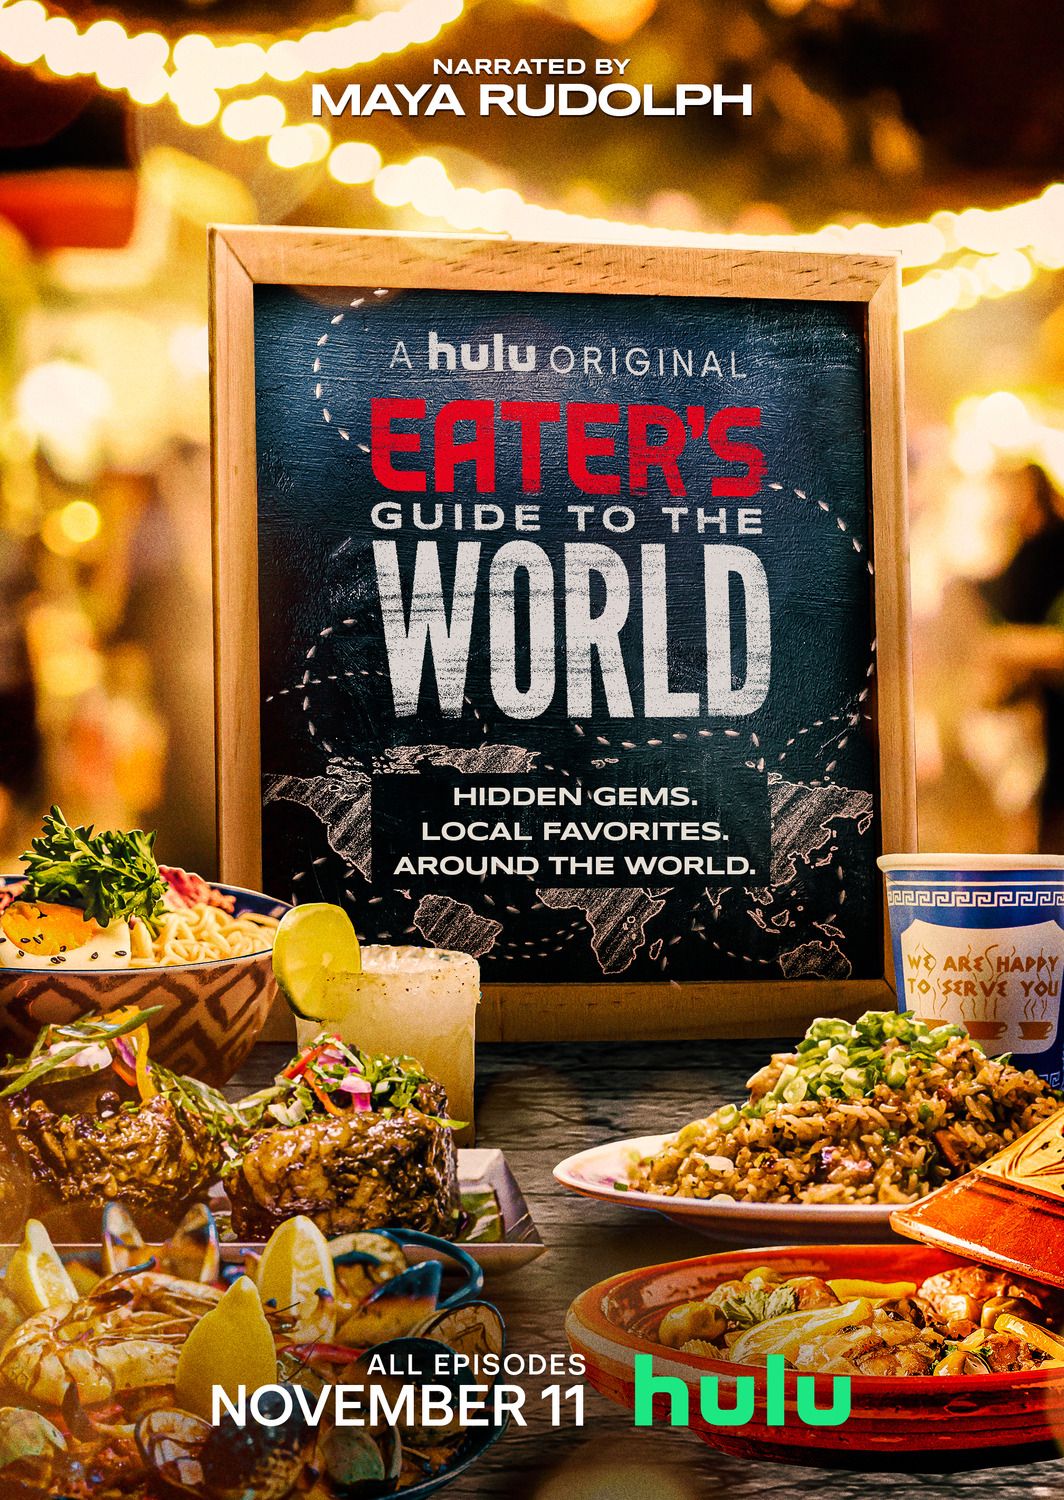 eater's guide to the world poster